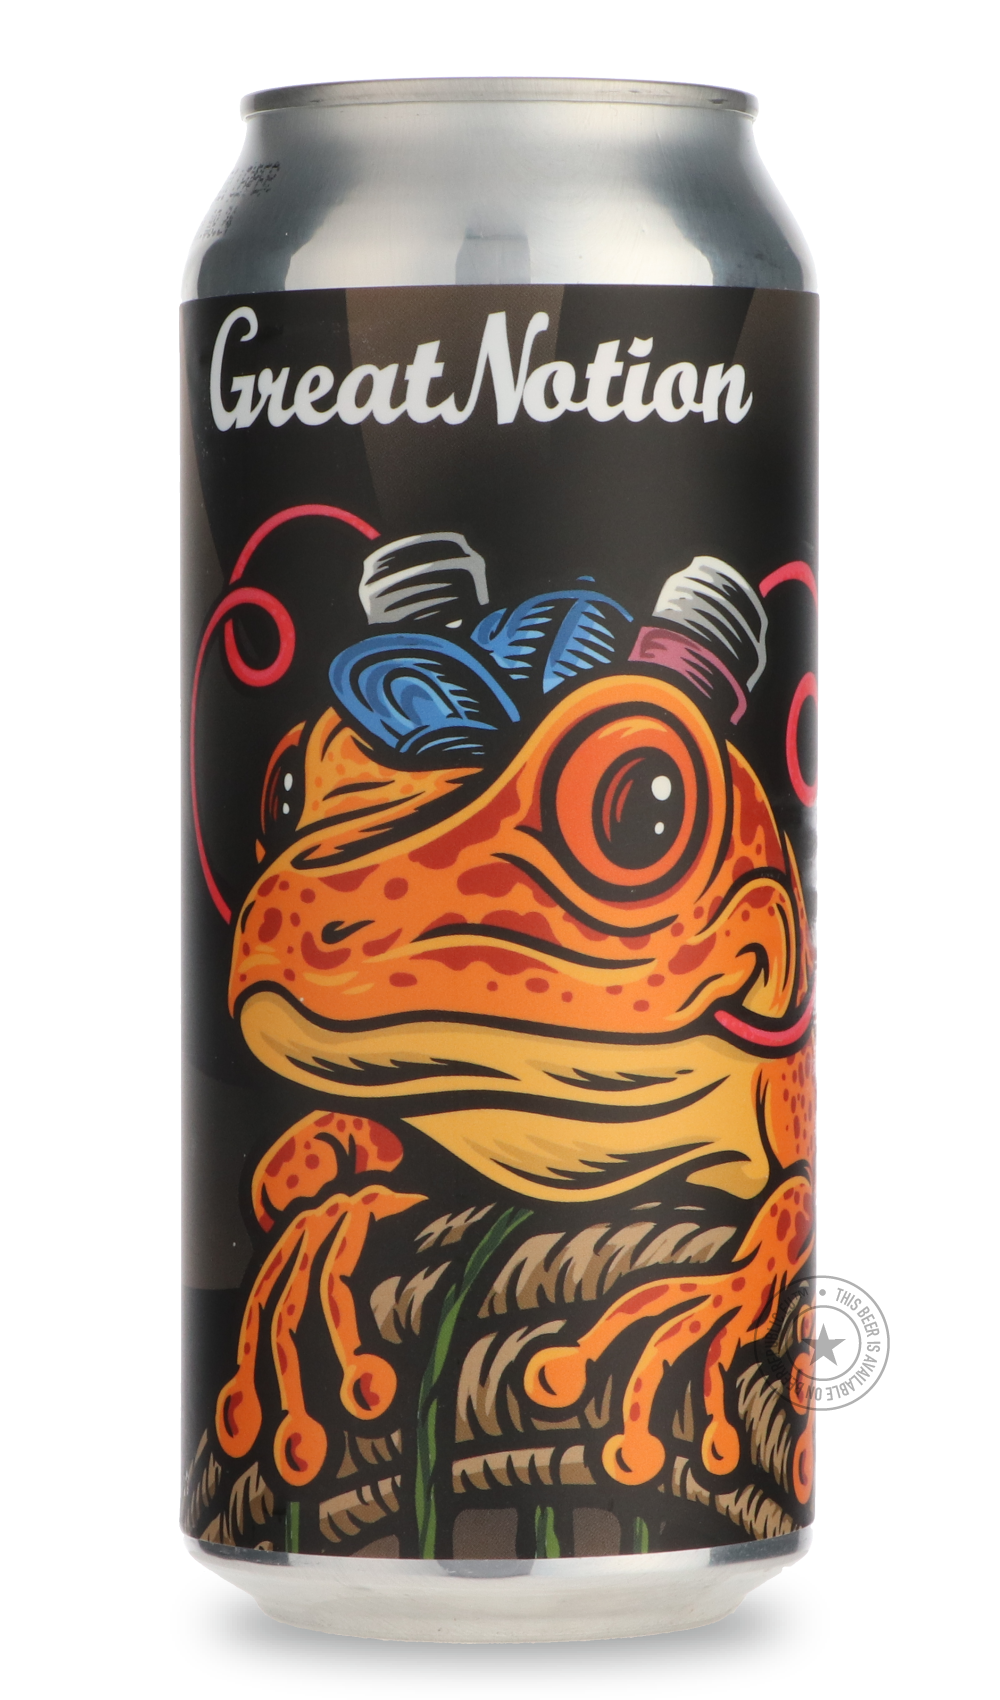 -Great Notion- POG Frog-Sour / Wild & Fruity- Only @ Beer Republic - The best online beer store for American & Canadian craft beer - Buy beer online from the USA and Canada - Bier online kopen - Amerikaans bier kopen - Craft beer store - Craft beer kopen - Amerikanisch bier kaufen - Bier online kaufen - Acheter biere online - IPA - Stout - Porter - New England IPA - Hazy IPA - Imperial Stout - Barrel Aged - Barrel Aged Imperial Stout - Brown - Dark beer - Blond - Blonde - Pilsner - Lager - Wheat - Weizen - 